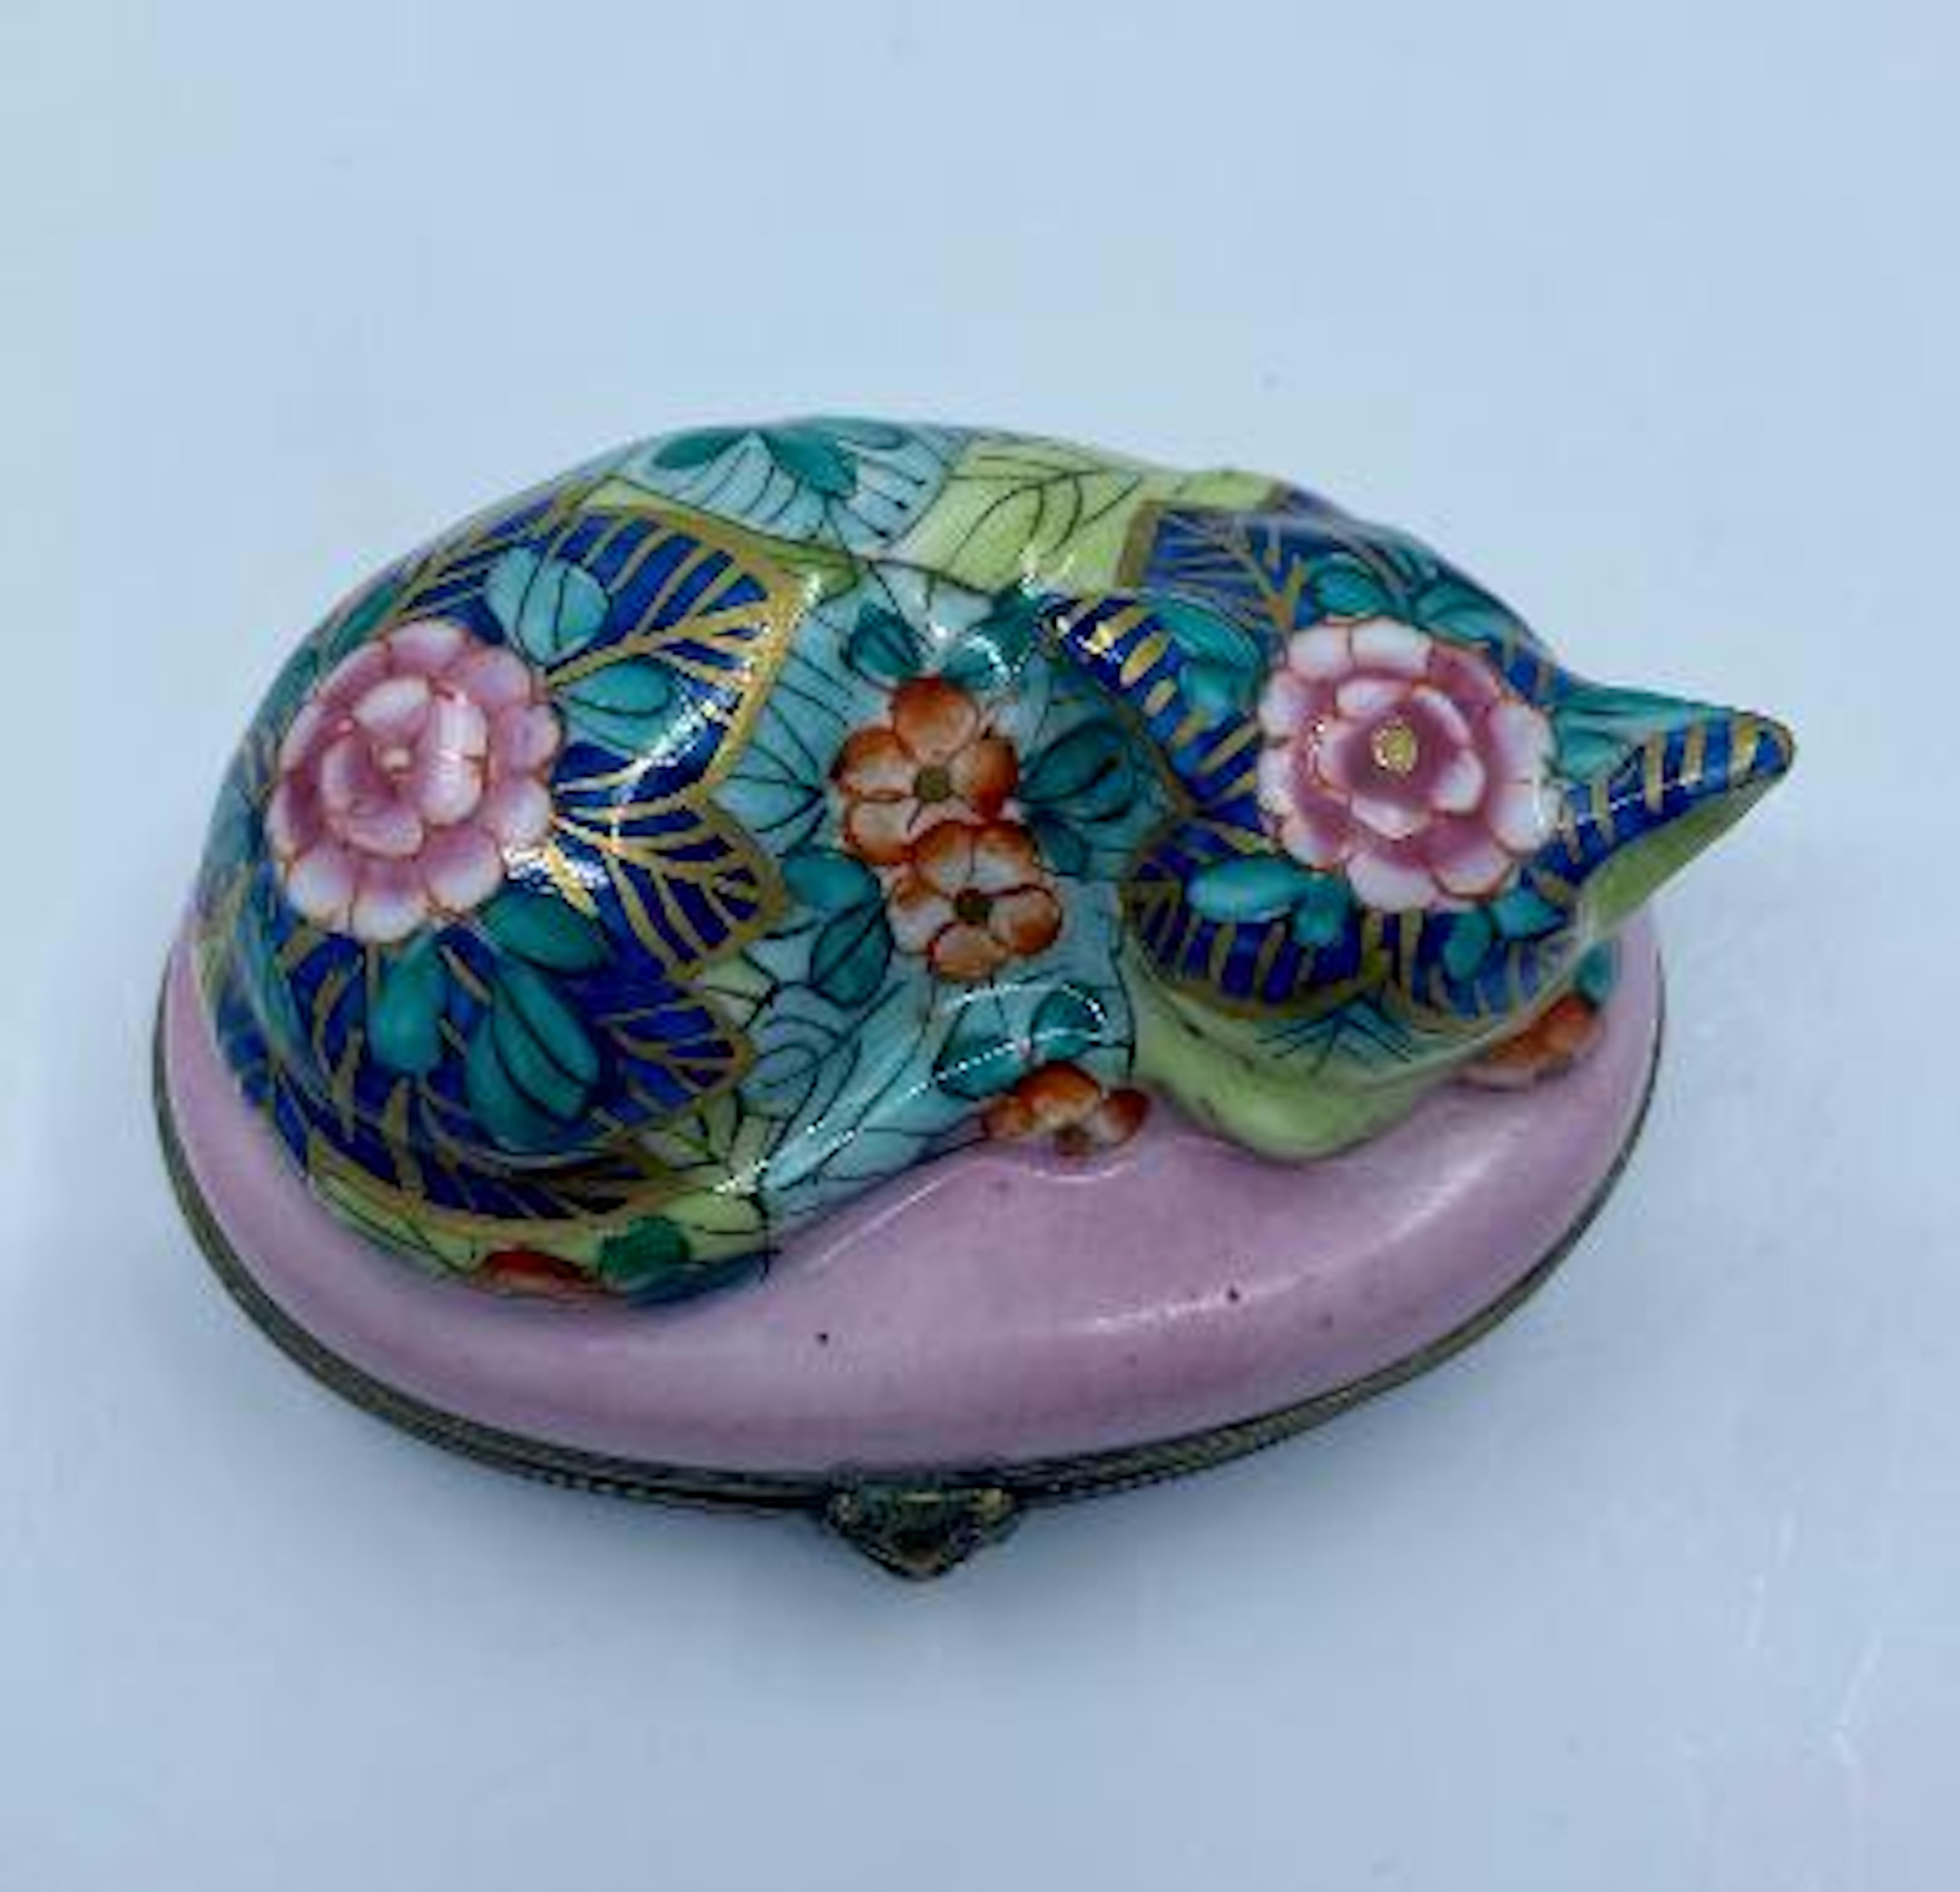 Beautiful and very detailed larger size Limoges porcelain sleeping cat trinket box is handmade and hand painted in rich polychrome colors and features robust blooms of pretty flowers accented in 24-karat gold. The cat is sleeping on a pink oval